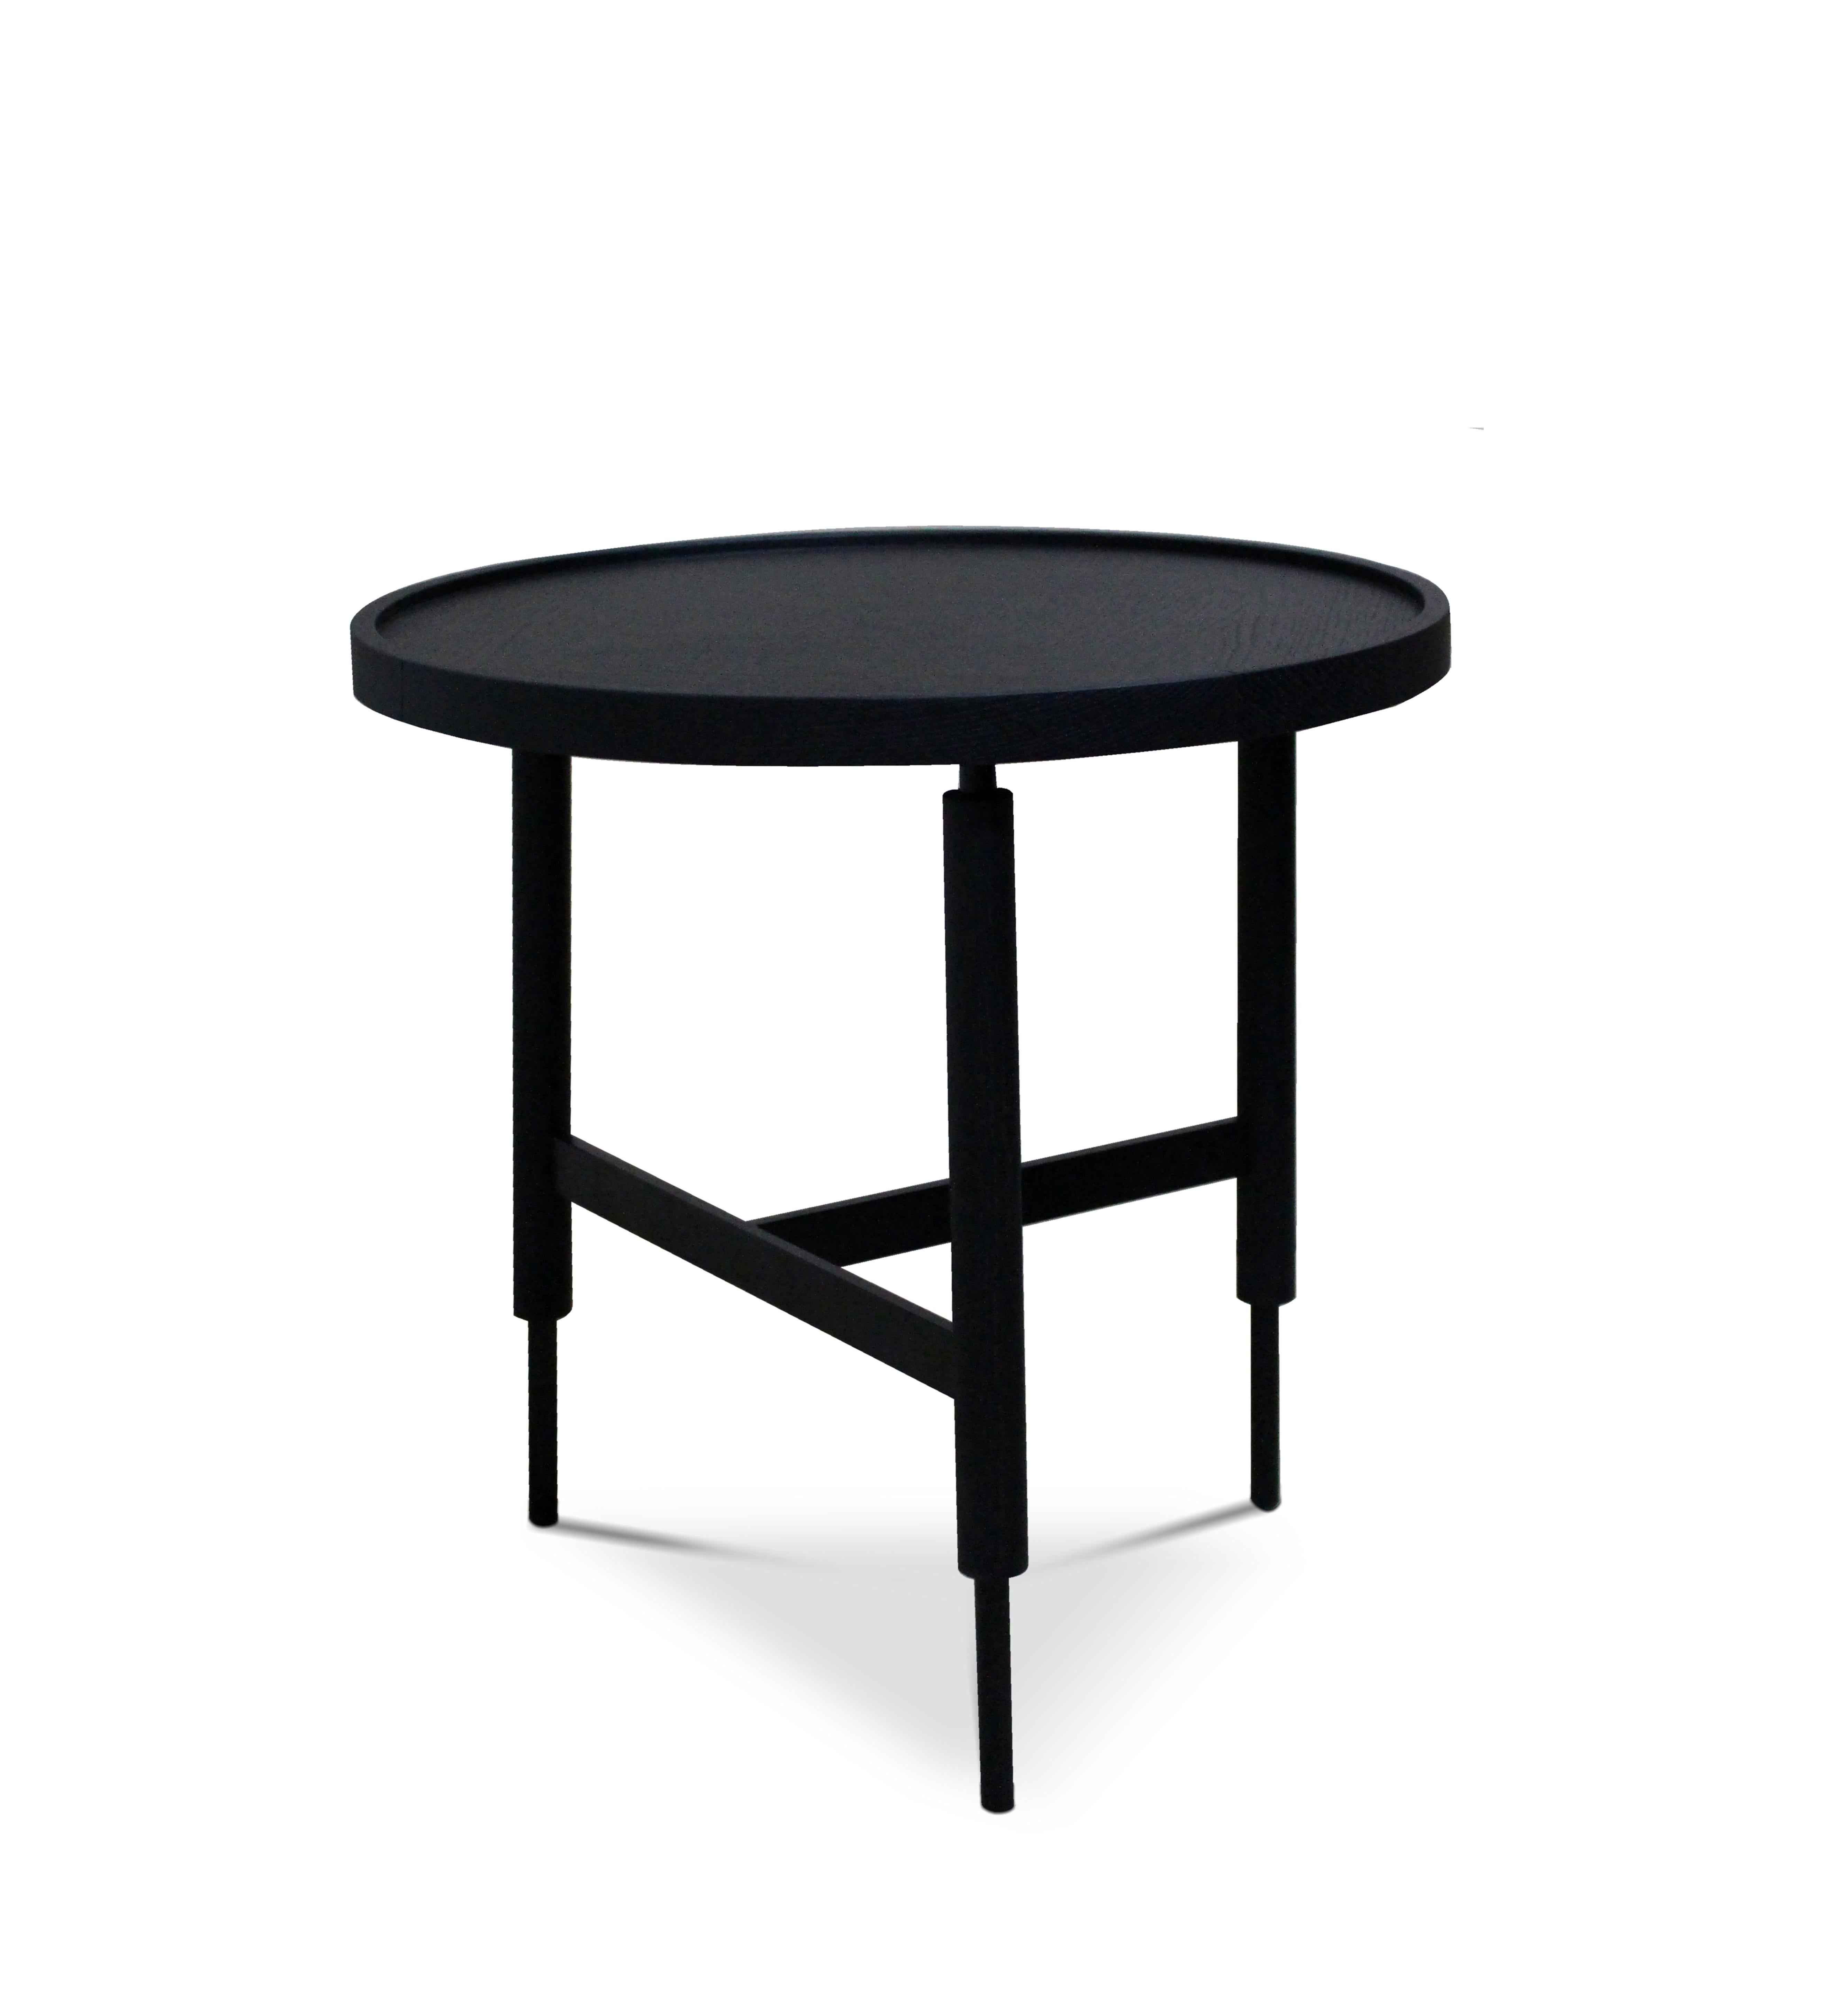 21st century designed by Collector Studio Collin side table.
The slender legs of wood and metal, the beautiful crossing details and a contrasting solid wood top, provides a large combination of materials in these side tables. They come in two